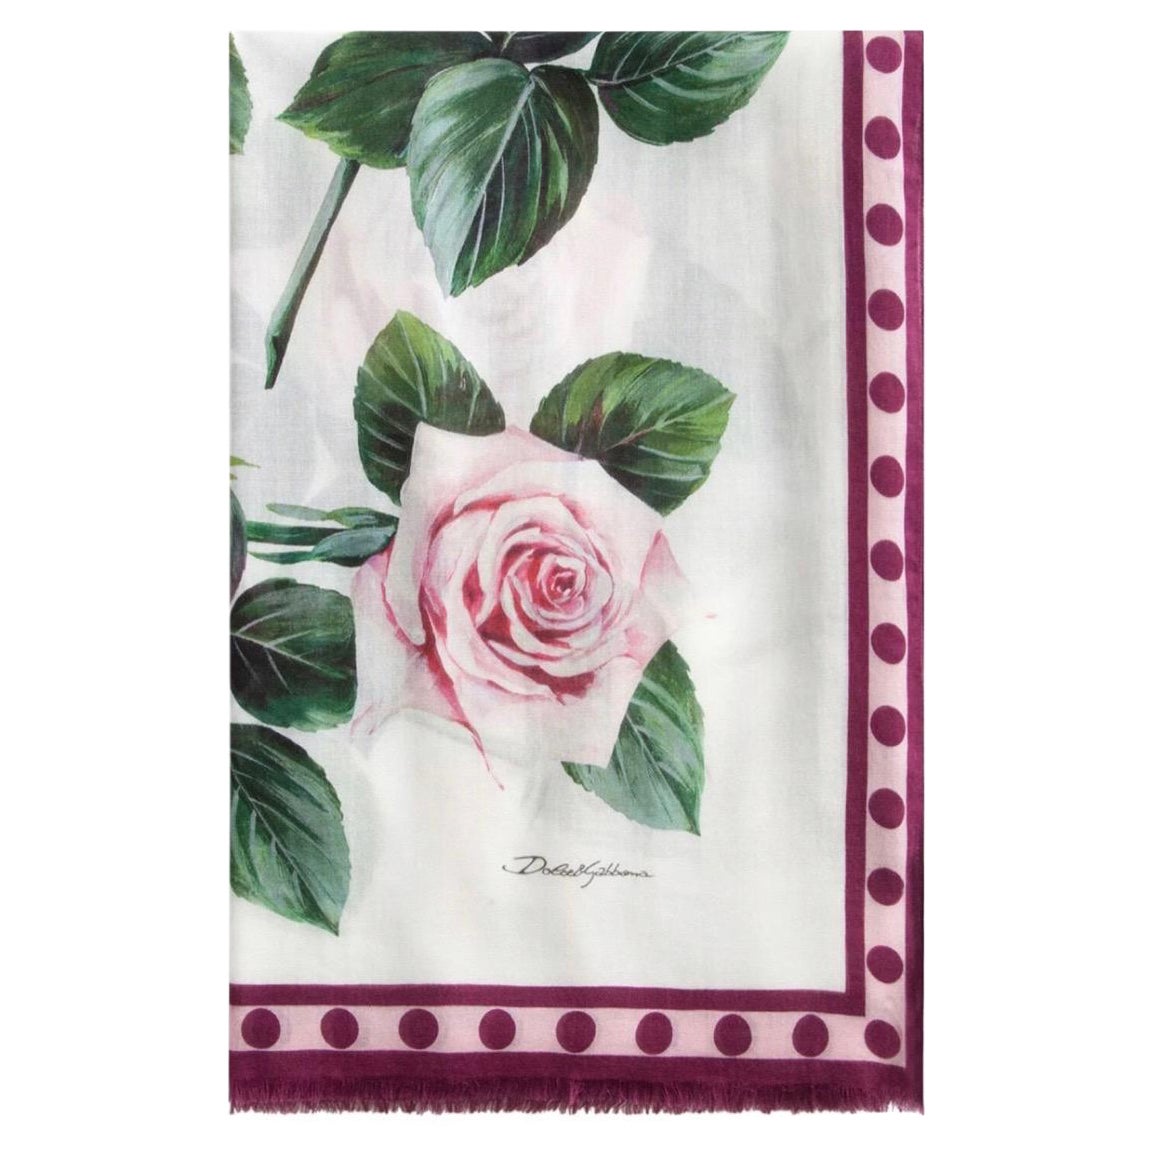 Dolce & Gabbana White Tropical
Rose printed cashmere modal blended scarf wrap